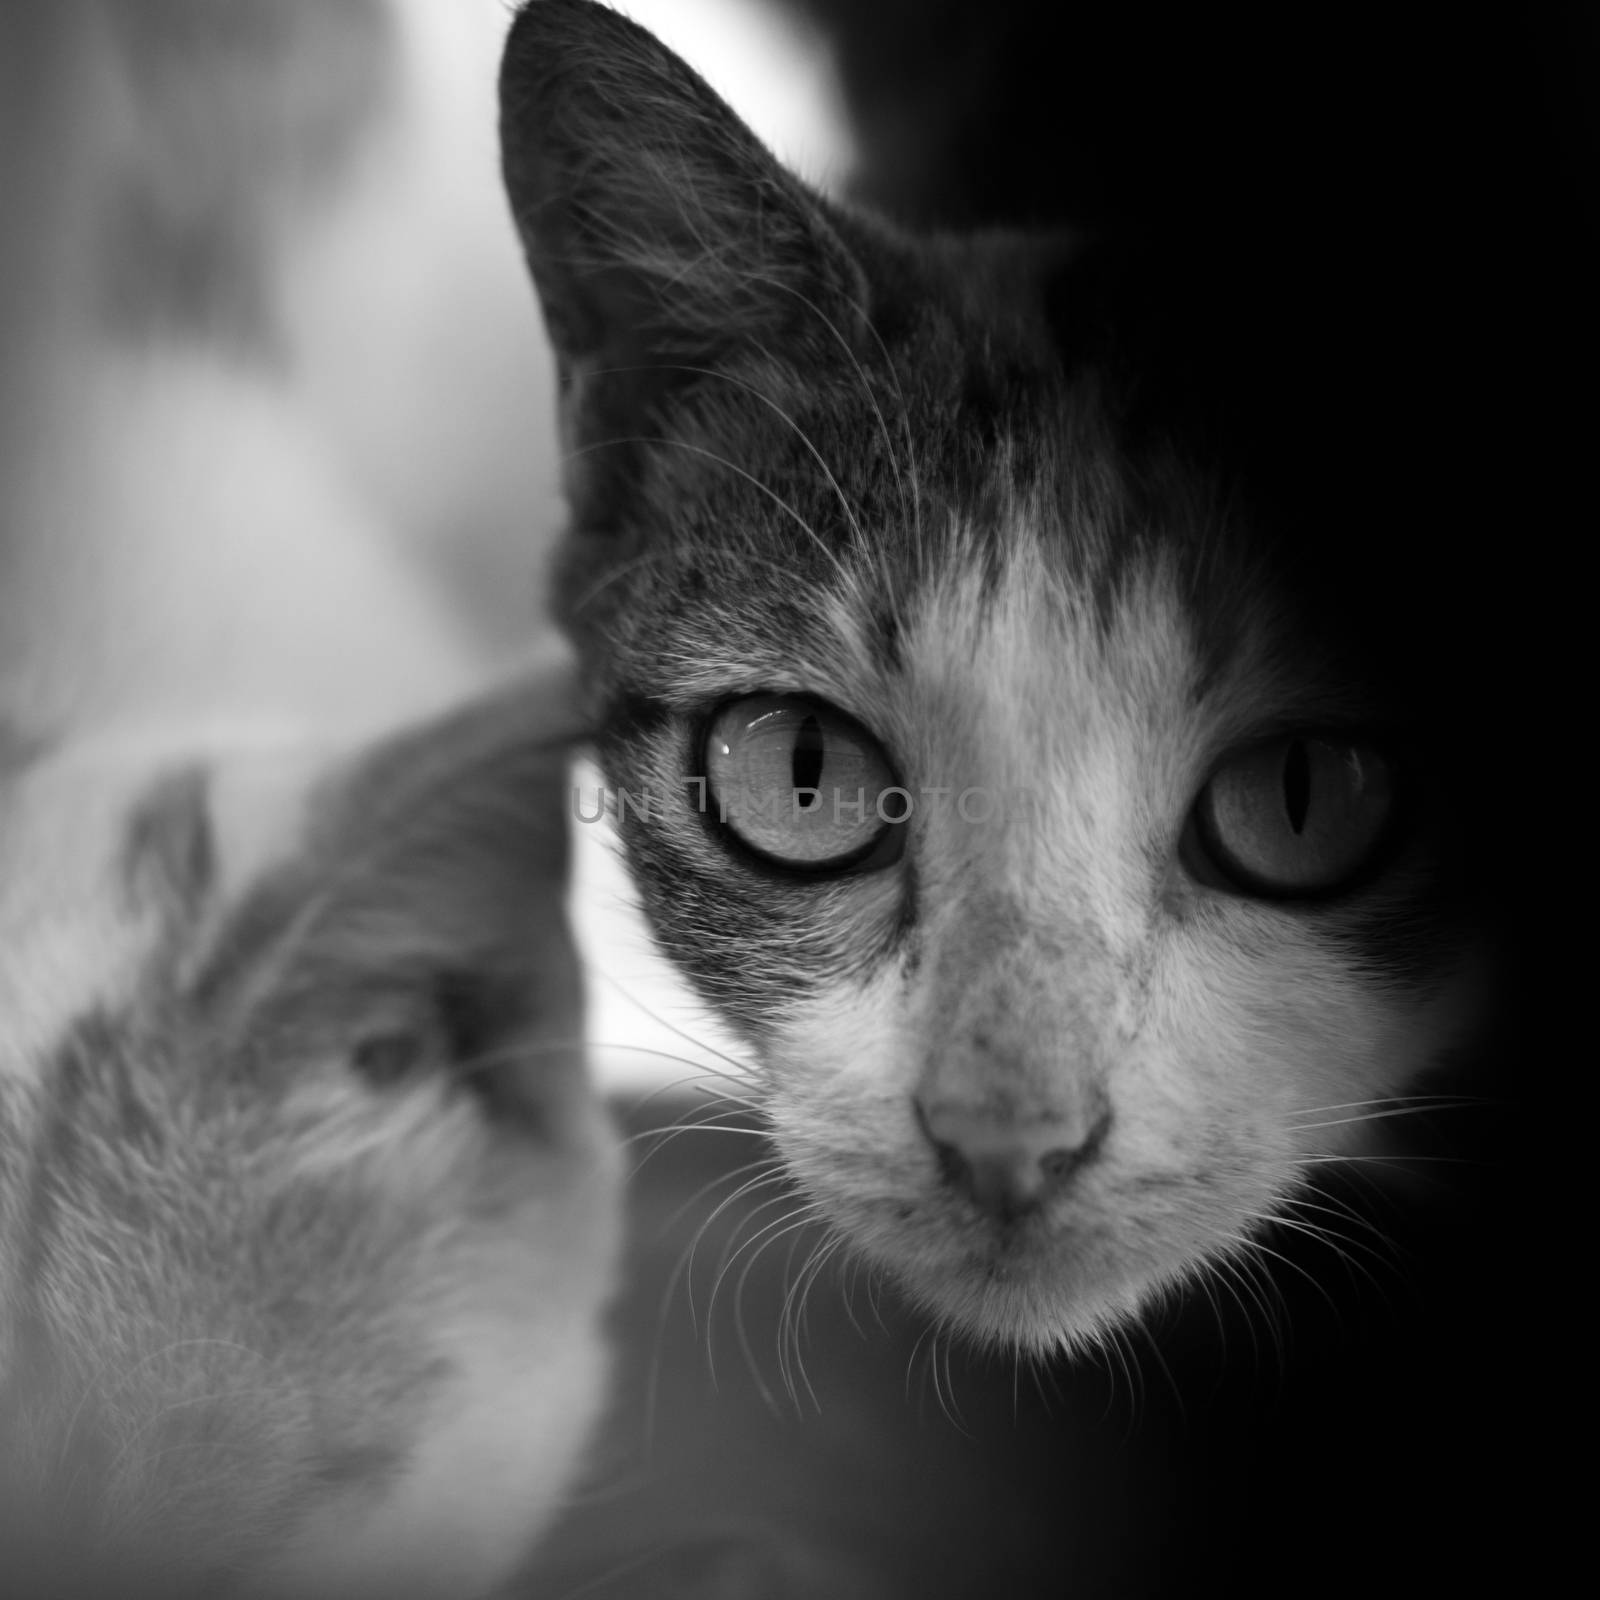 BLACK AND WHITE PHOTO OF CAT LOOKING AT CAMERA